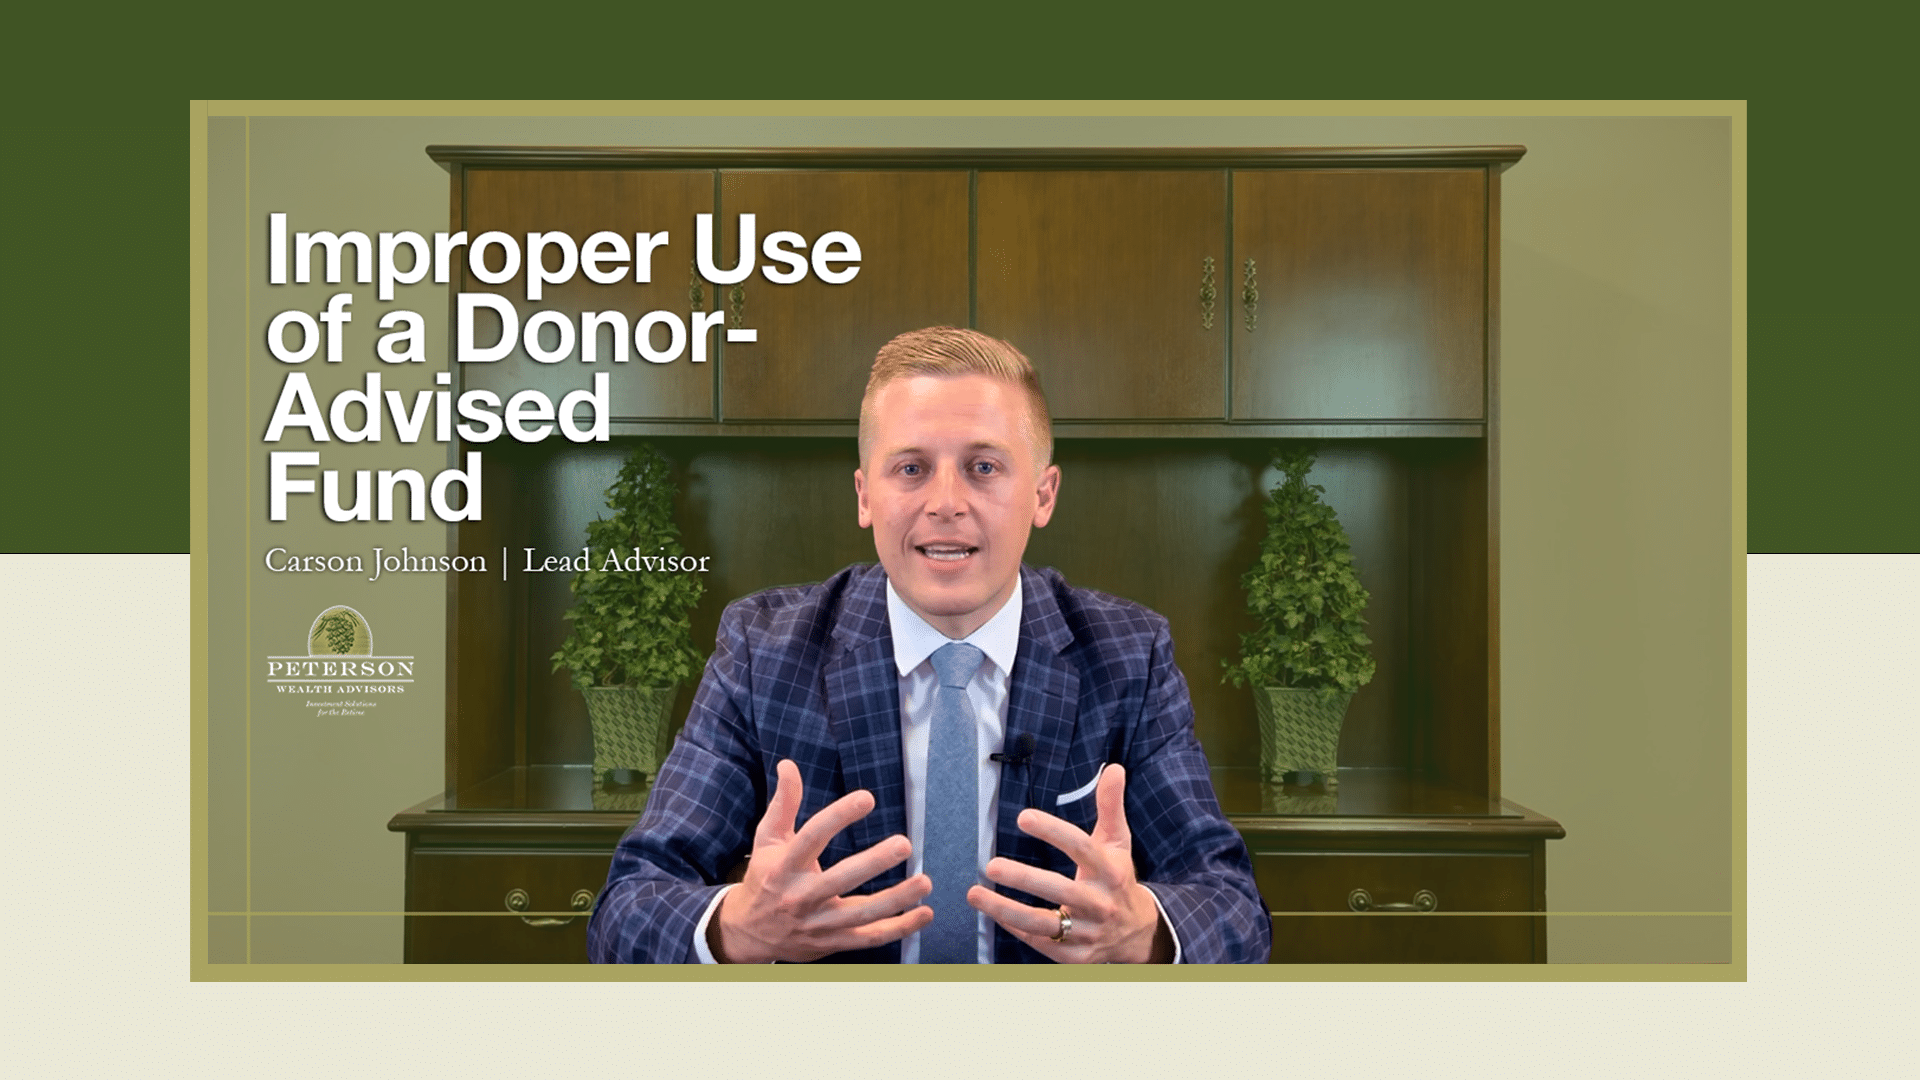 Improper Use of a Donor-Advised Fund